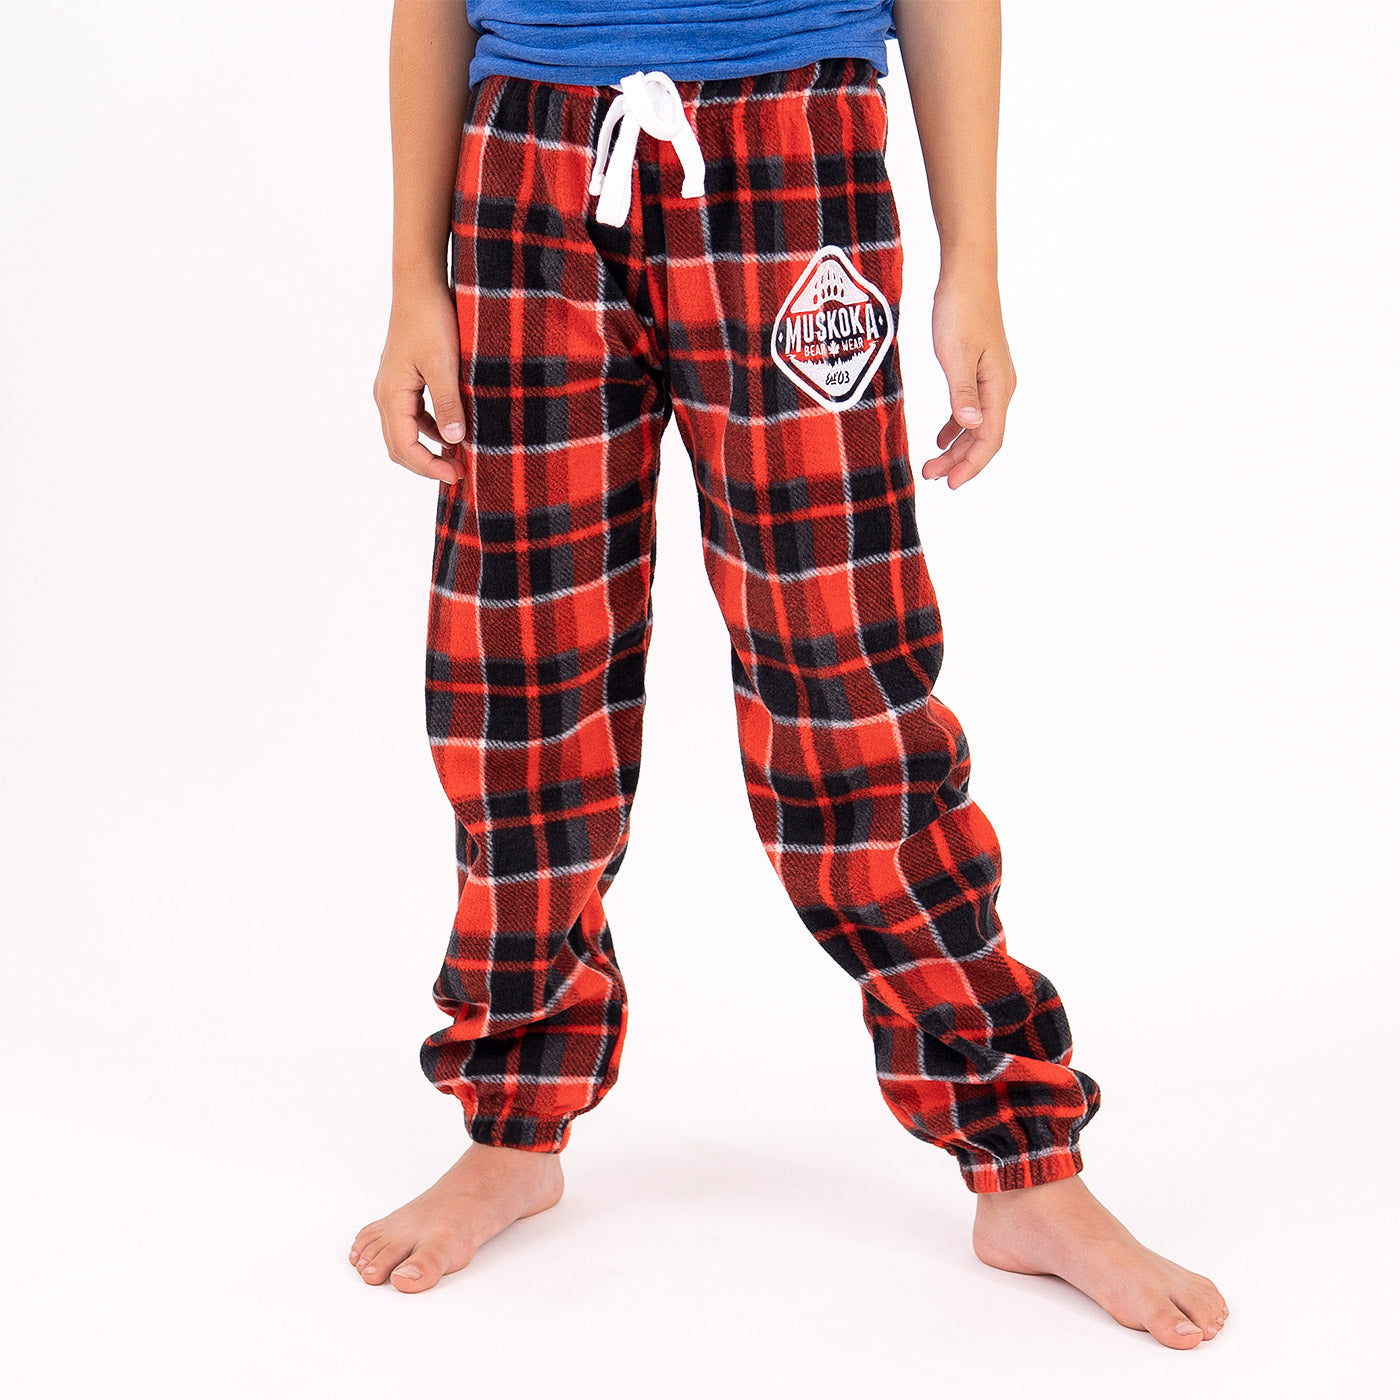 Cartoon Plaid Denim Pants: Embroidered Loose Fit For Kids Perfect